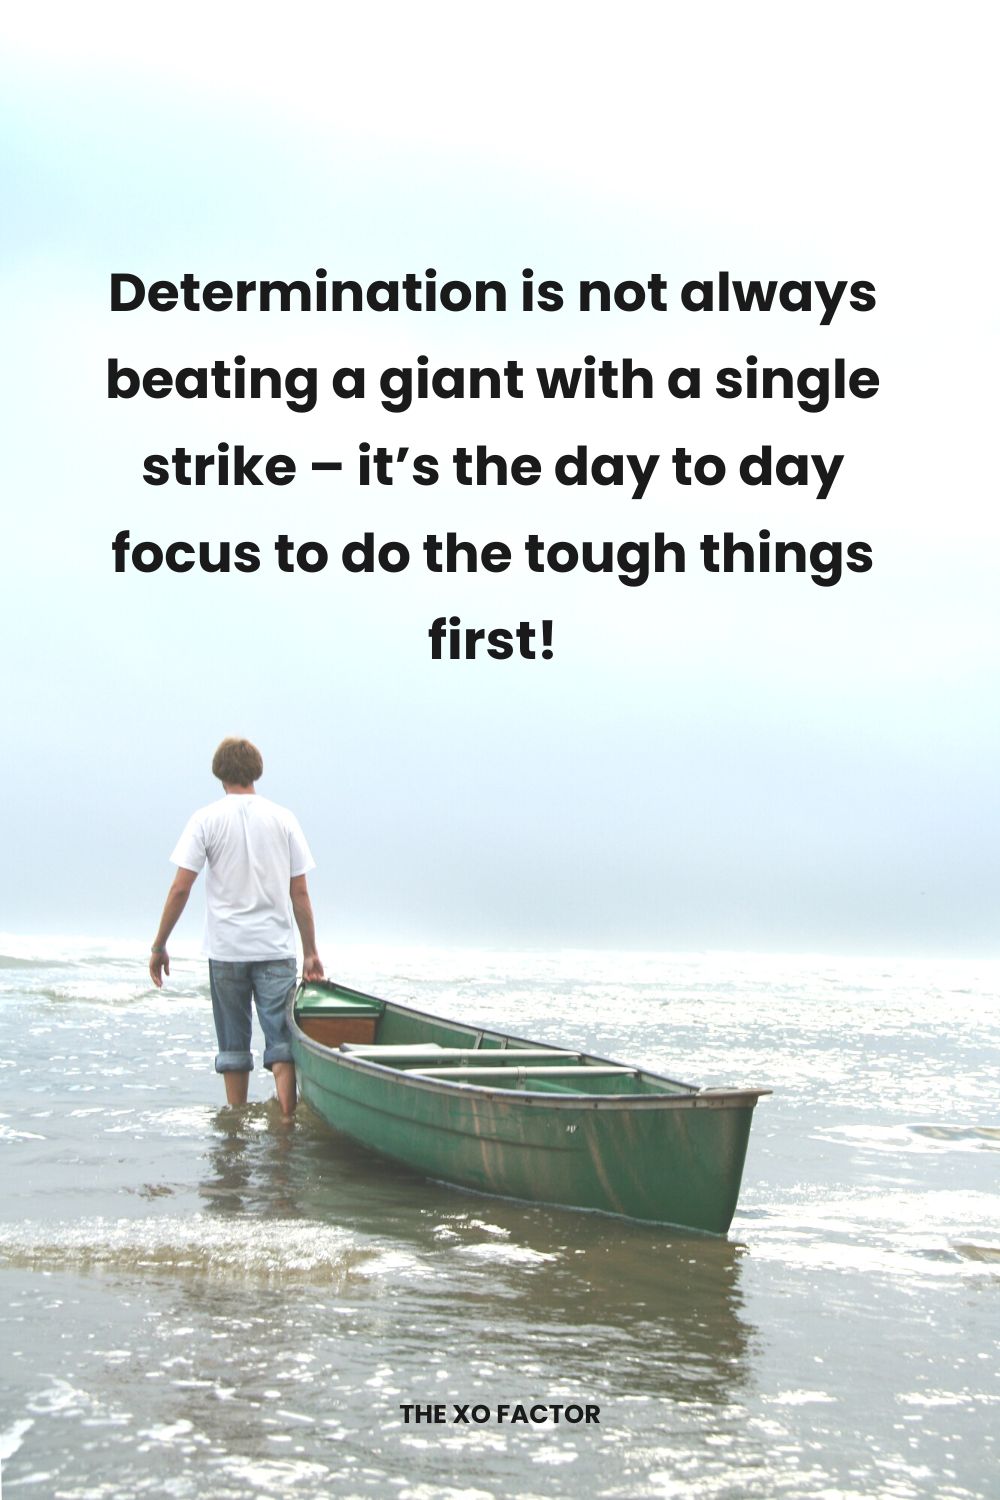 Determination is not always beating a giant with a single strike – it’s the day to day focus to do the tough things first!